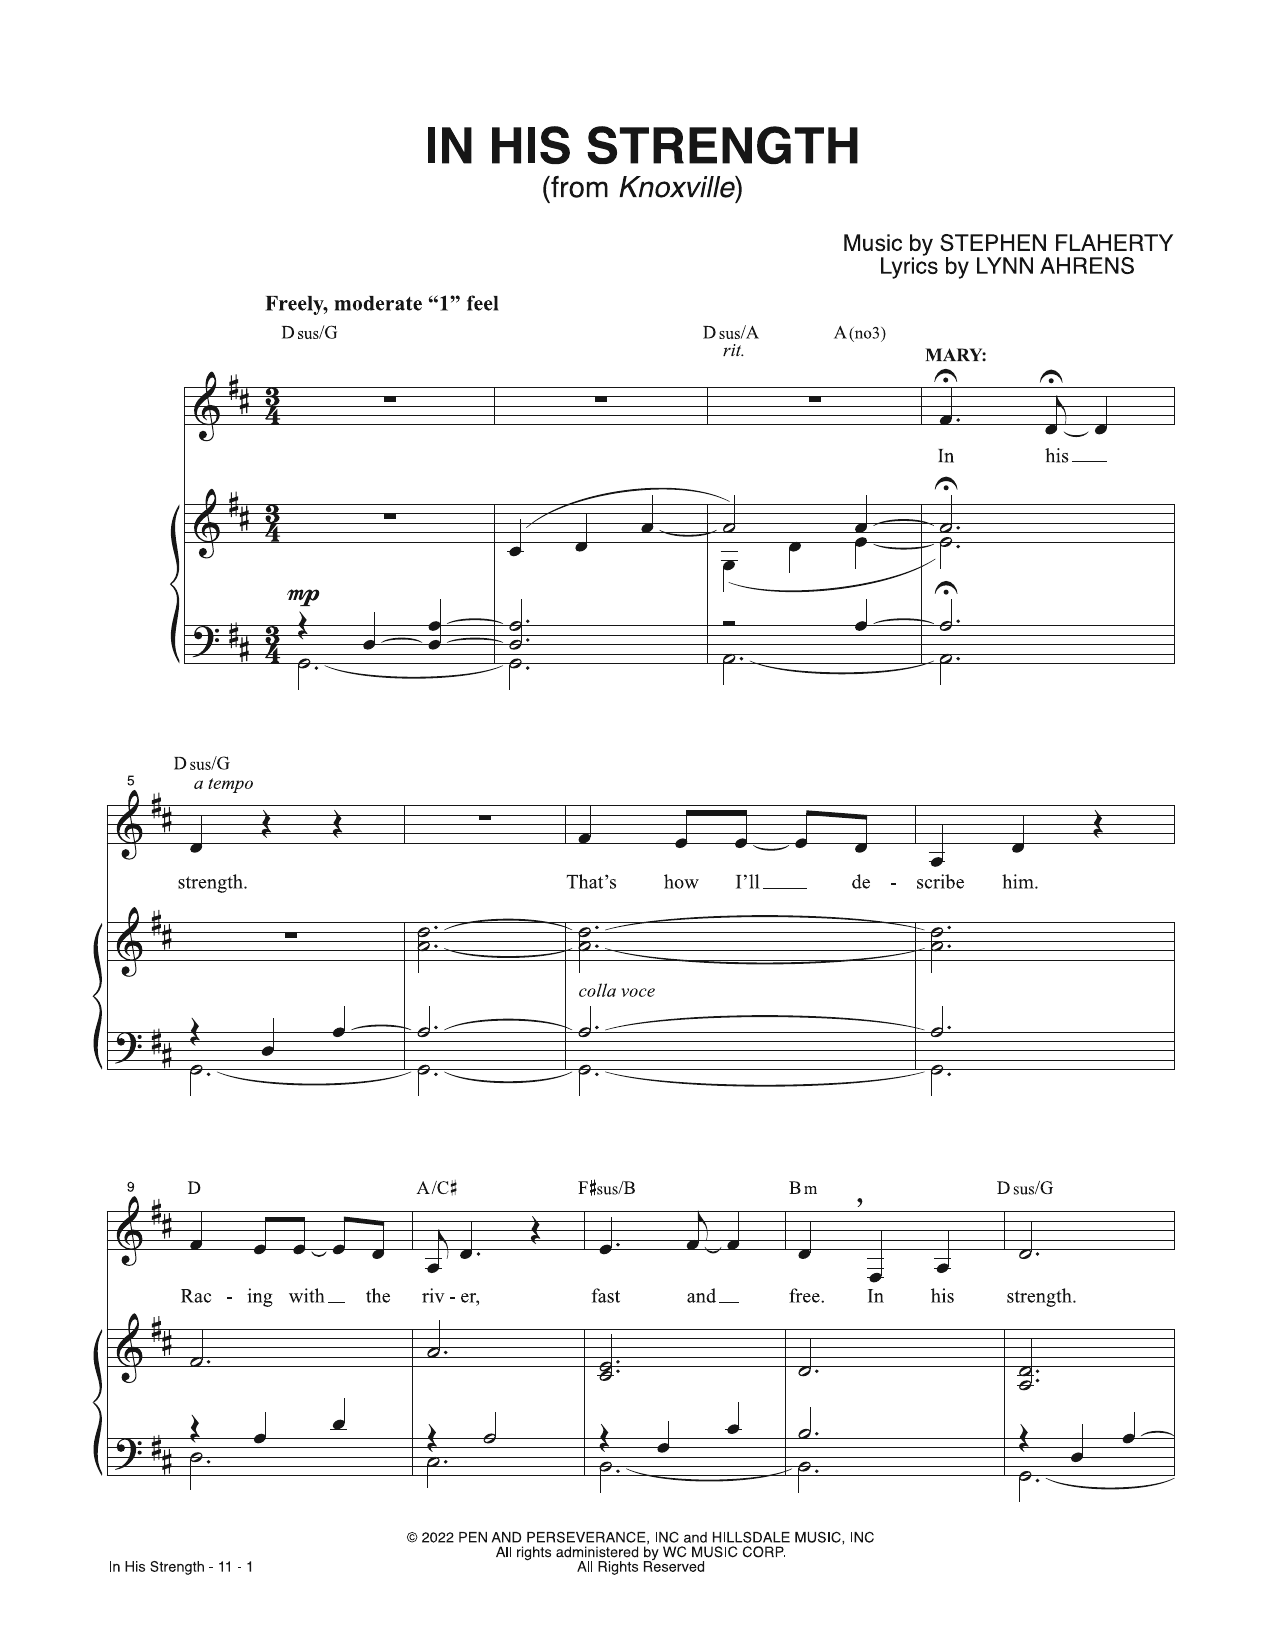 Lynn Ahrens & Stephen Flaherty In His Strength (from Knoxville) sheet music notes printable PDF score